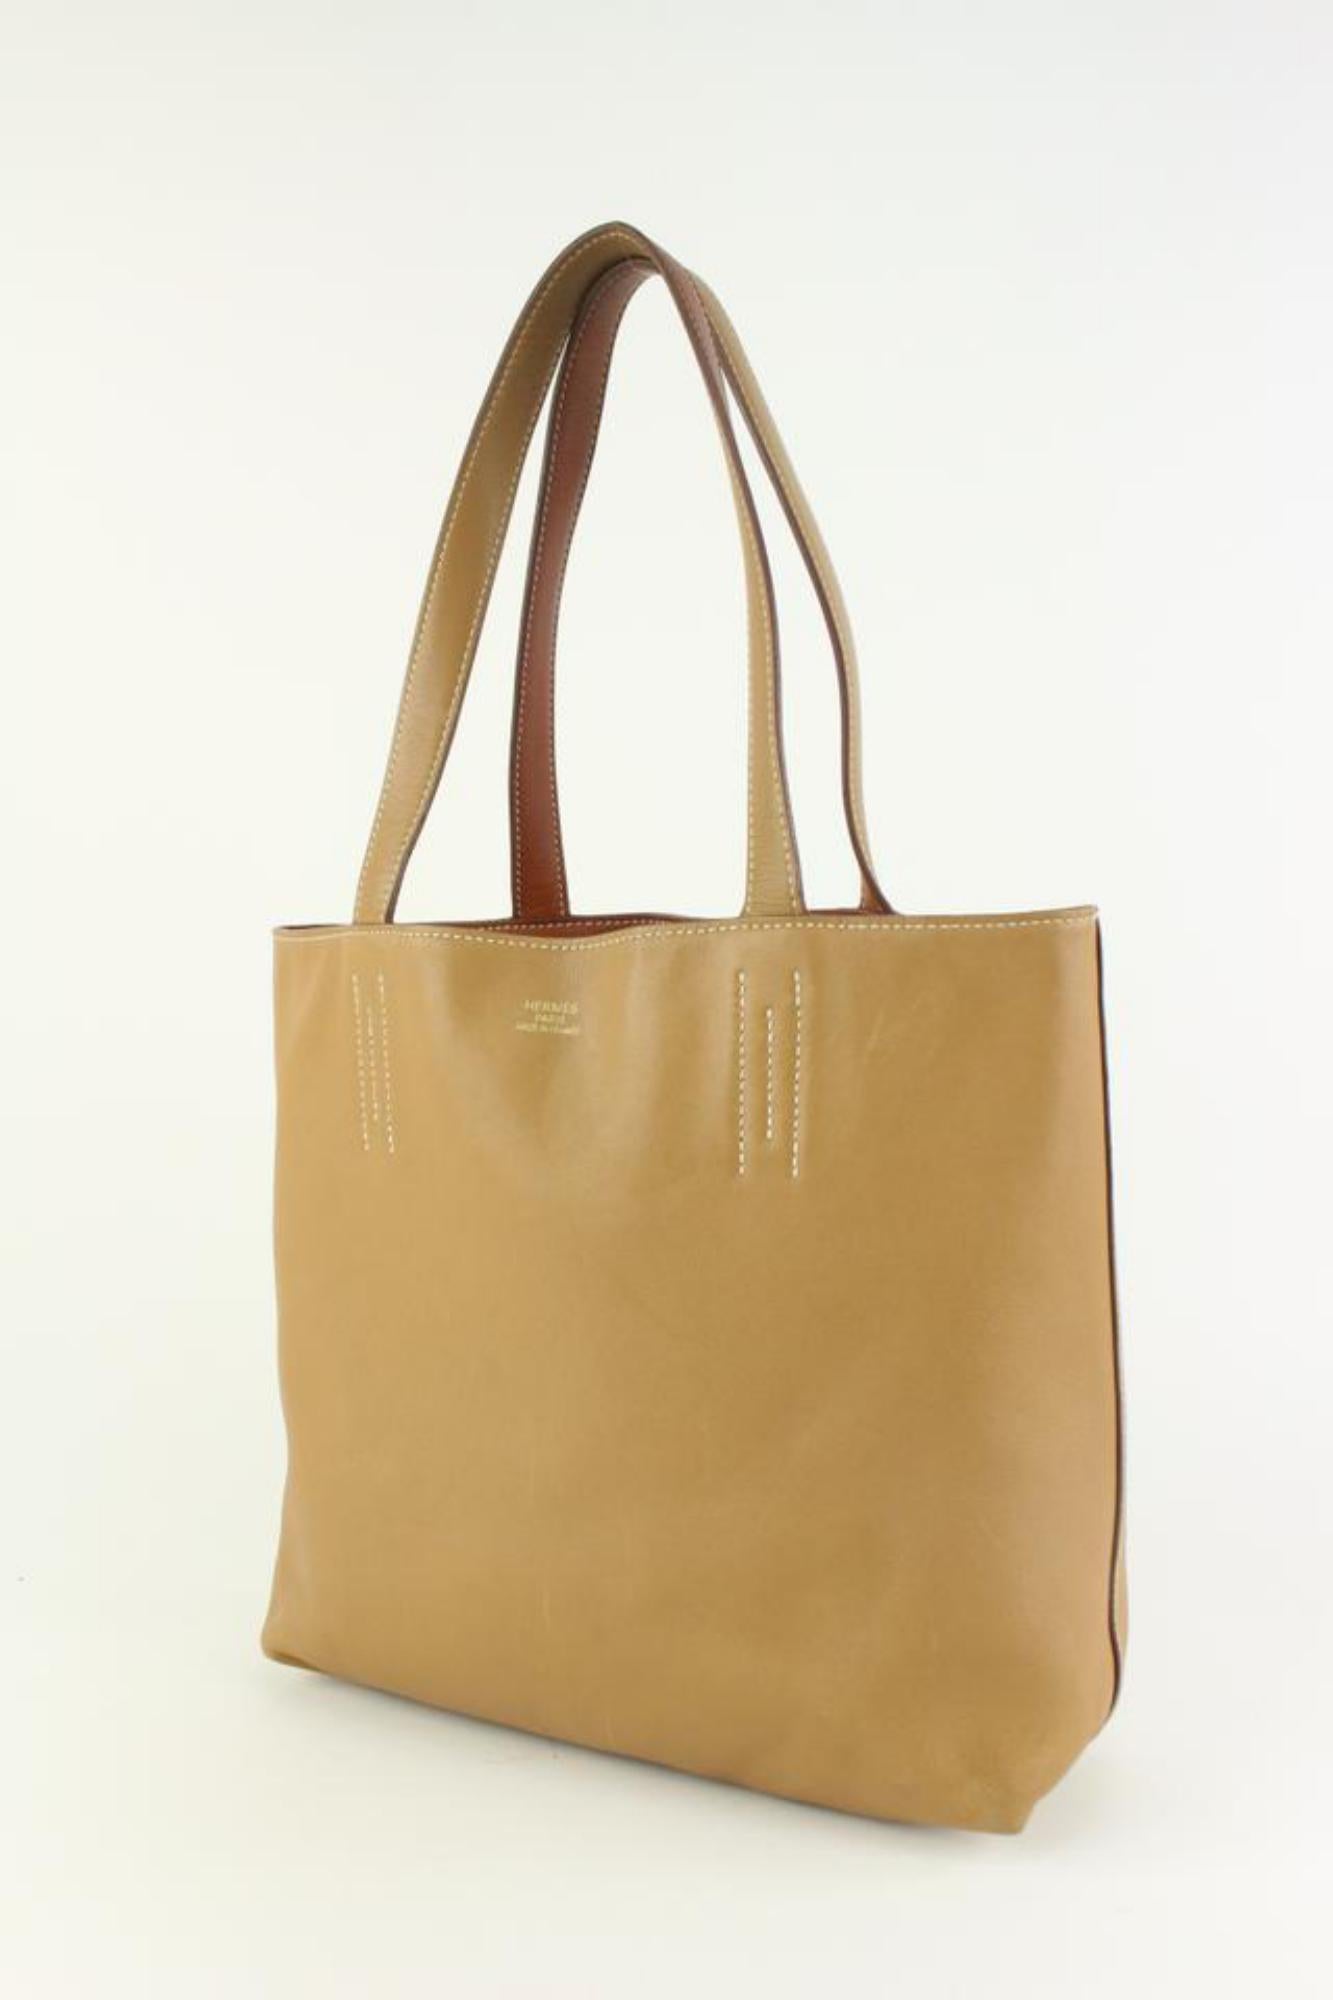 Hermès Brown x Gold Reversible Leather Double Sens 36 cm Tote 1111h43 For Sale 5